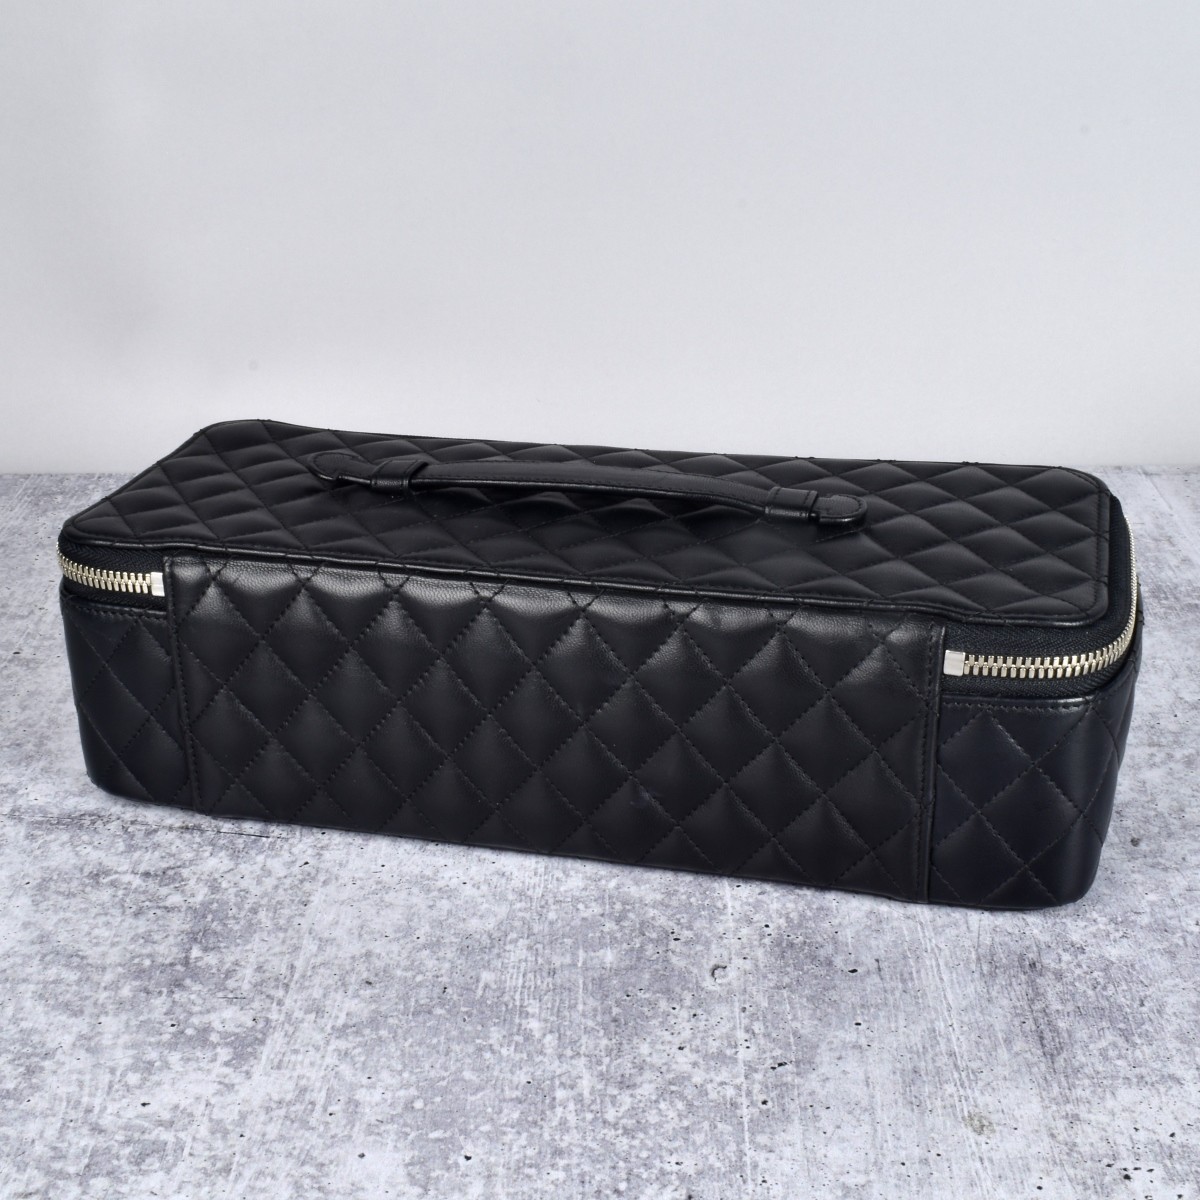 Chanel Traveling Jewelry Case